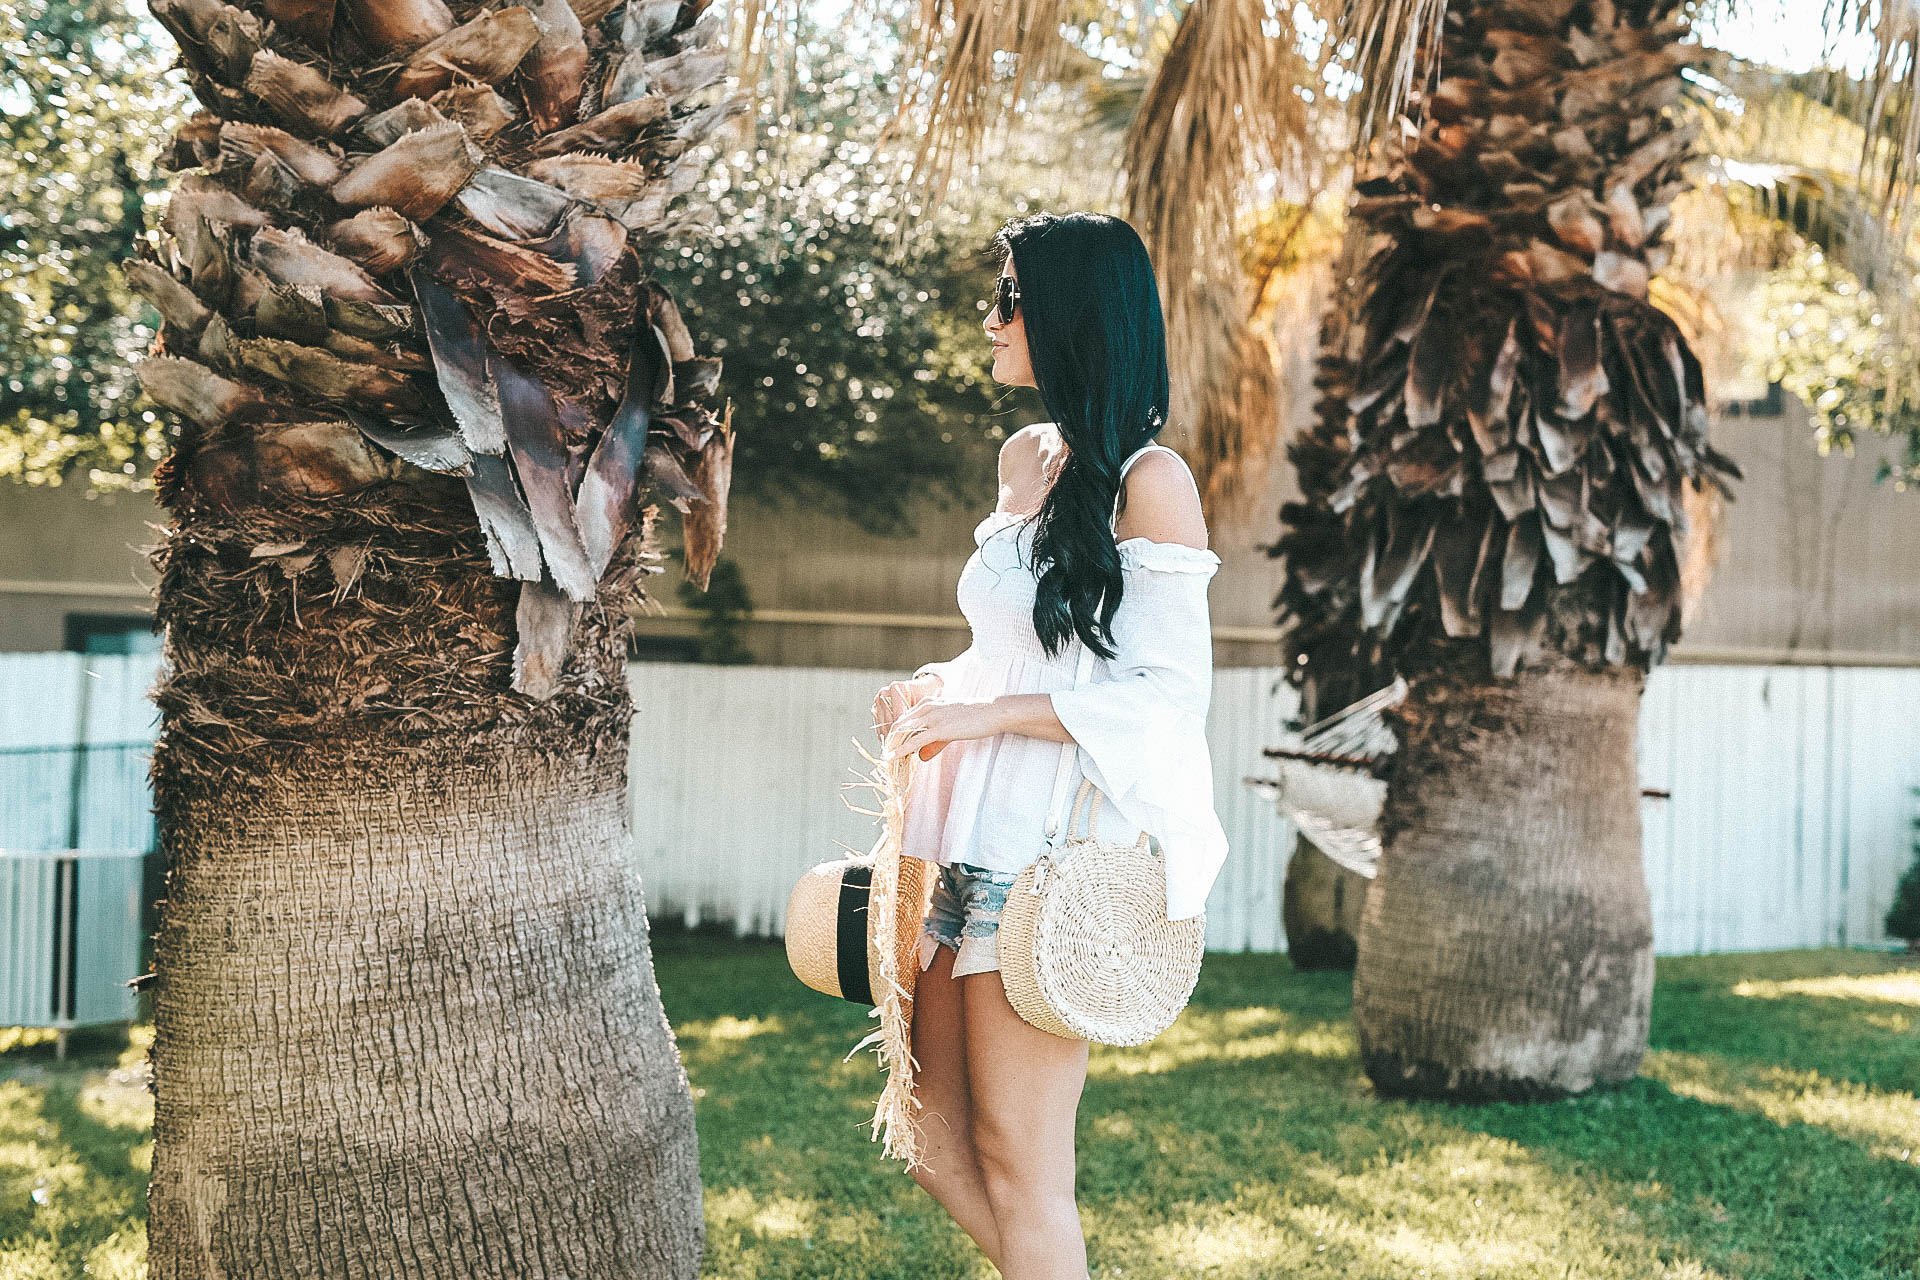 DTKAustin shares where to get the best white tops for summer from Chicwish that wont break the bank along with her frayed straw hat on sale. - {Affordable Summer Tops That Won't Break the Bank} featured by popular Austin fashion blogger, Dressed to Kill